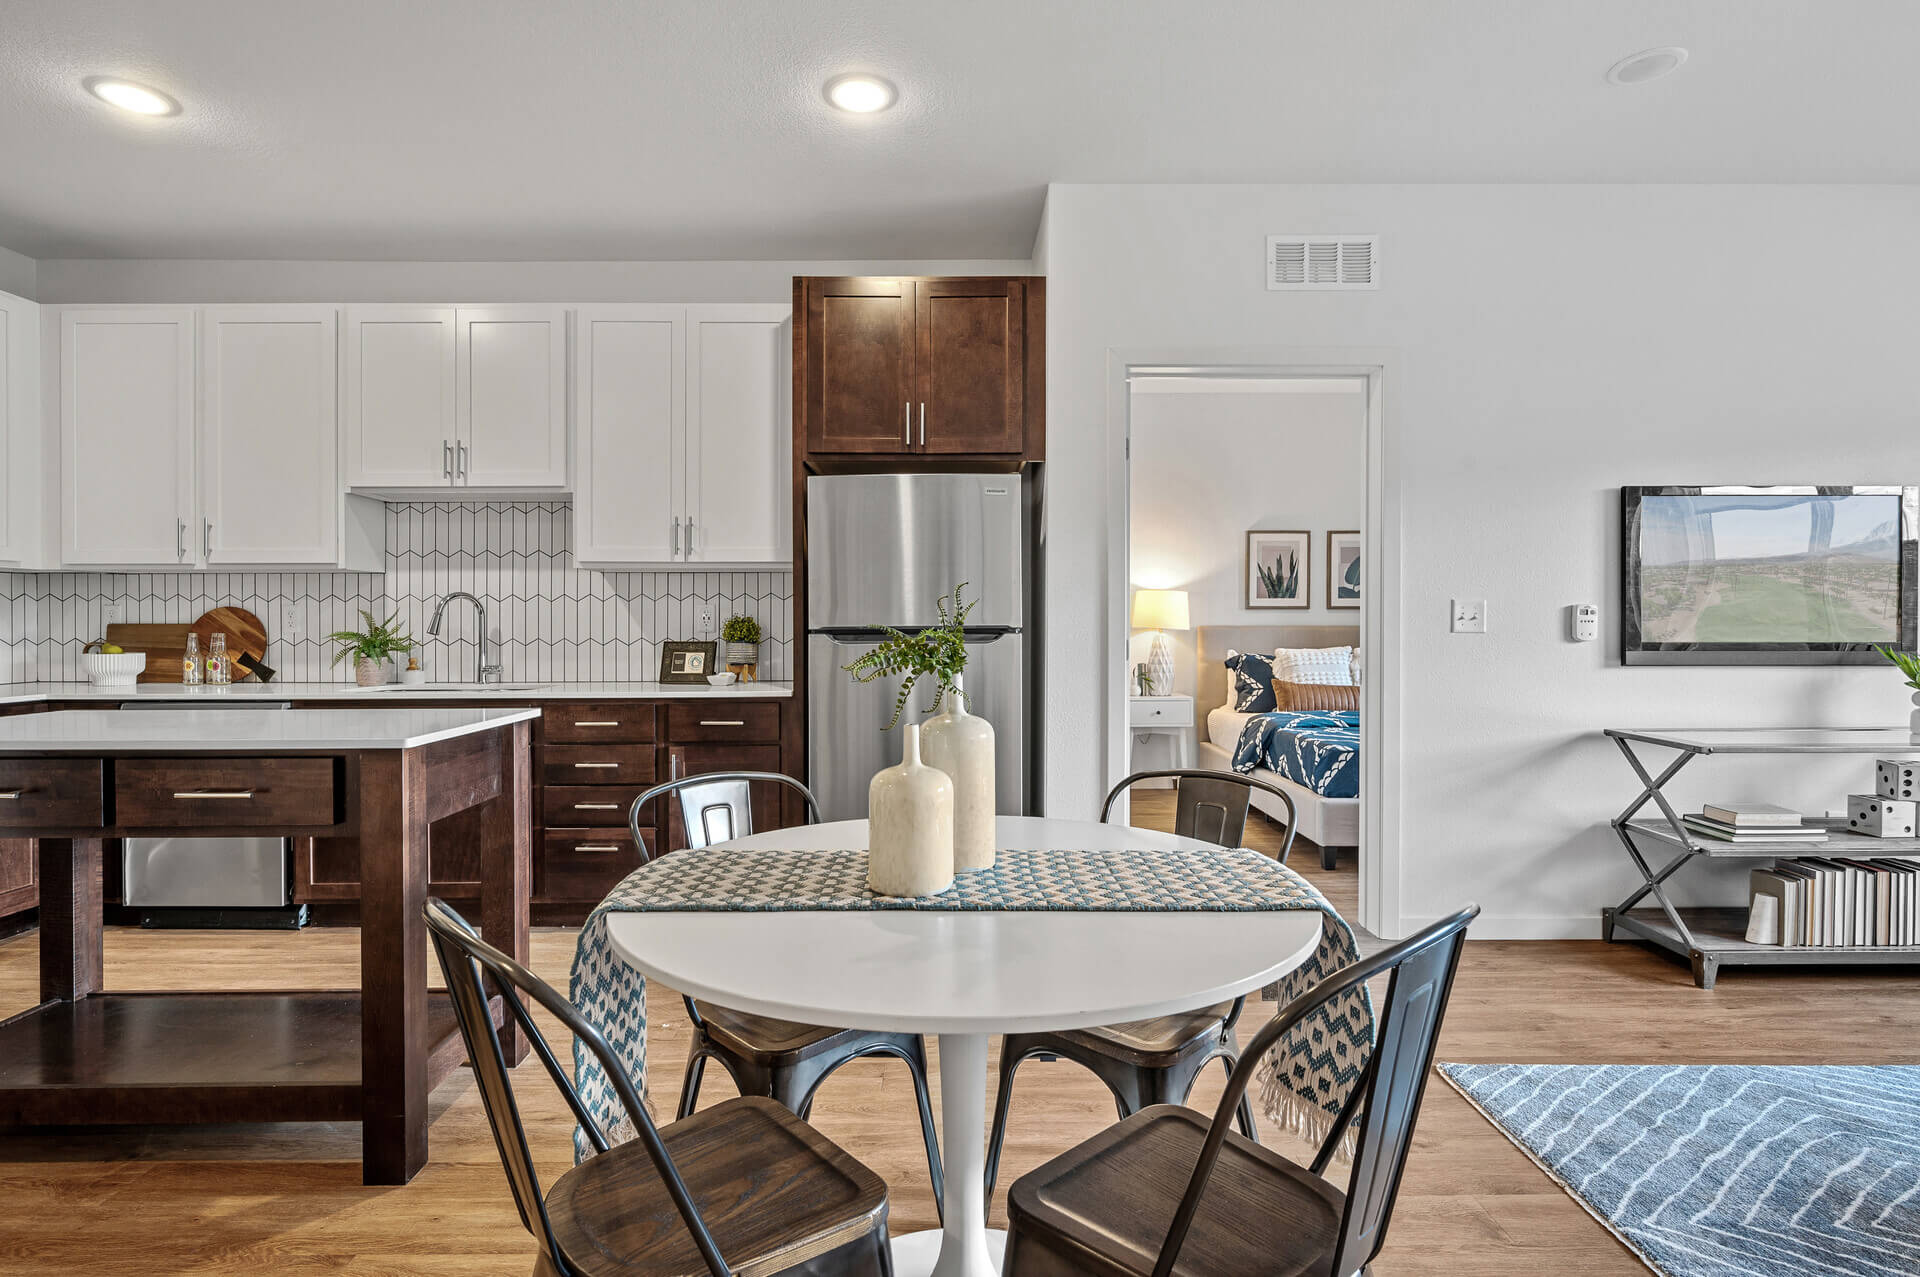 Spacious, well-lit kitchen with white cabinets and stainless steel appliances, a central island, and an adjacent dining area with a round table and patterned chairs. A view into a bedroom and a living area with a mounted TV is also visible.